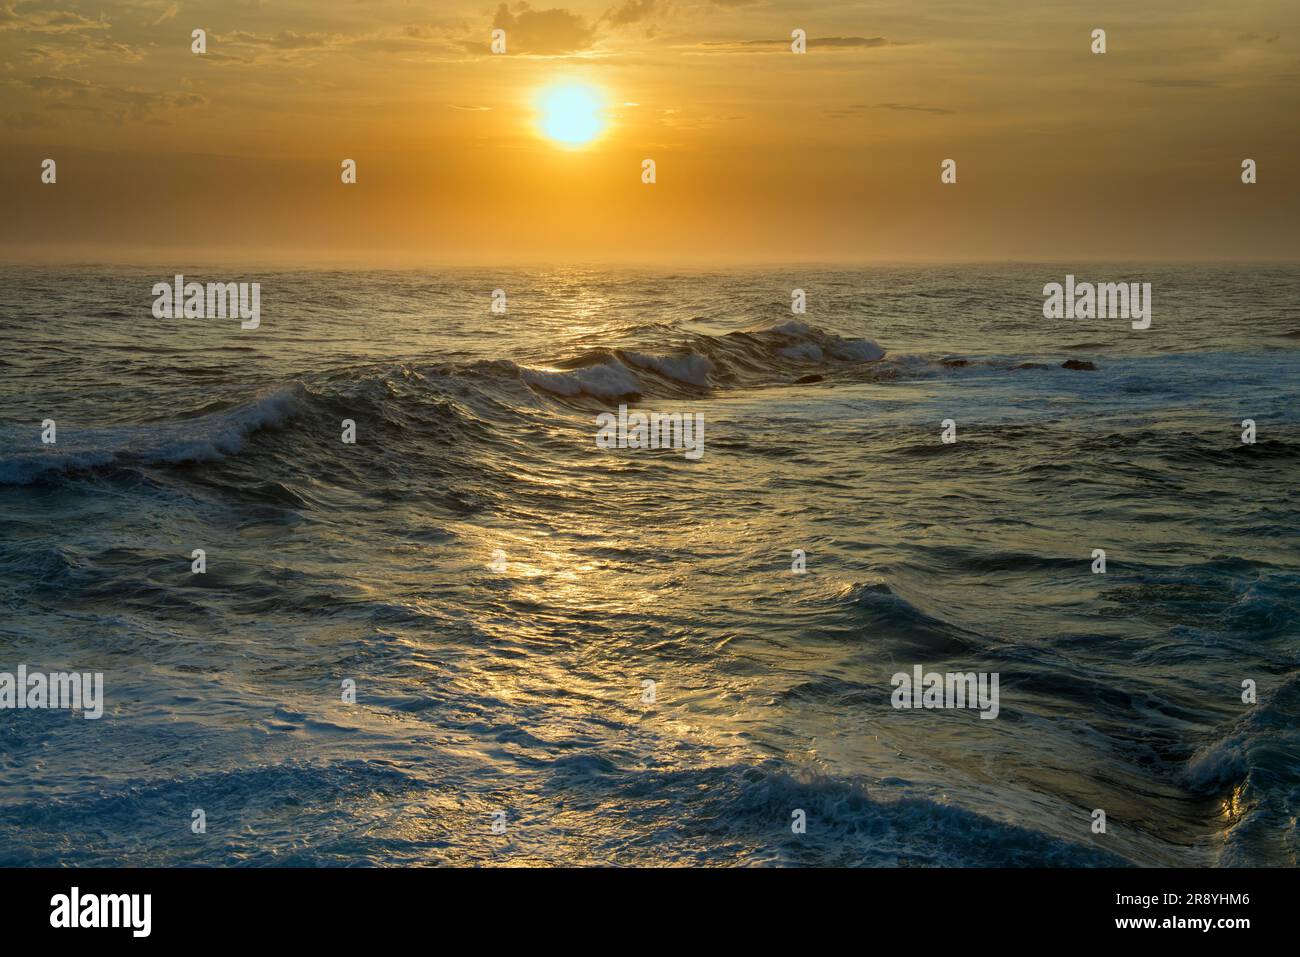 Senjojiki coast and the waves dyed by the rays of the setting sun Stock Photo